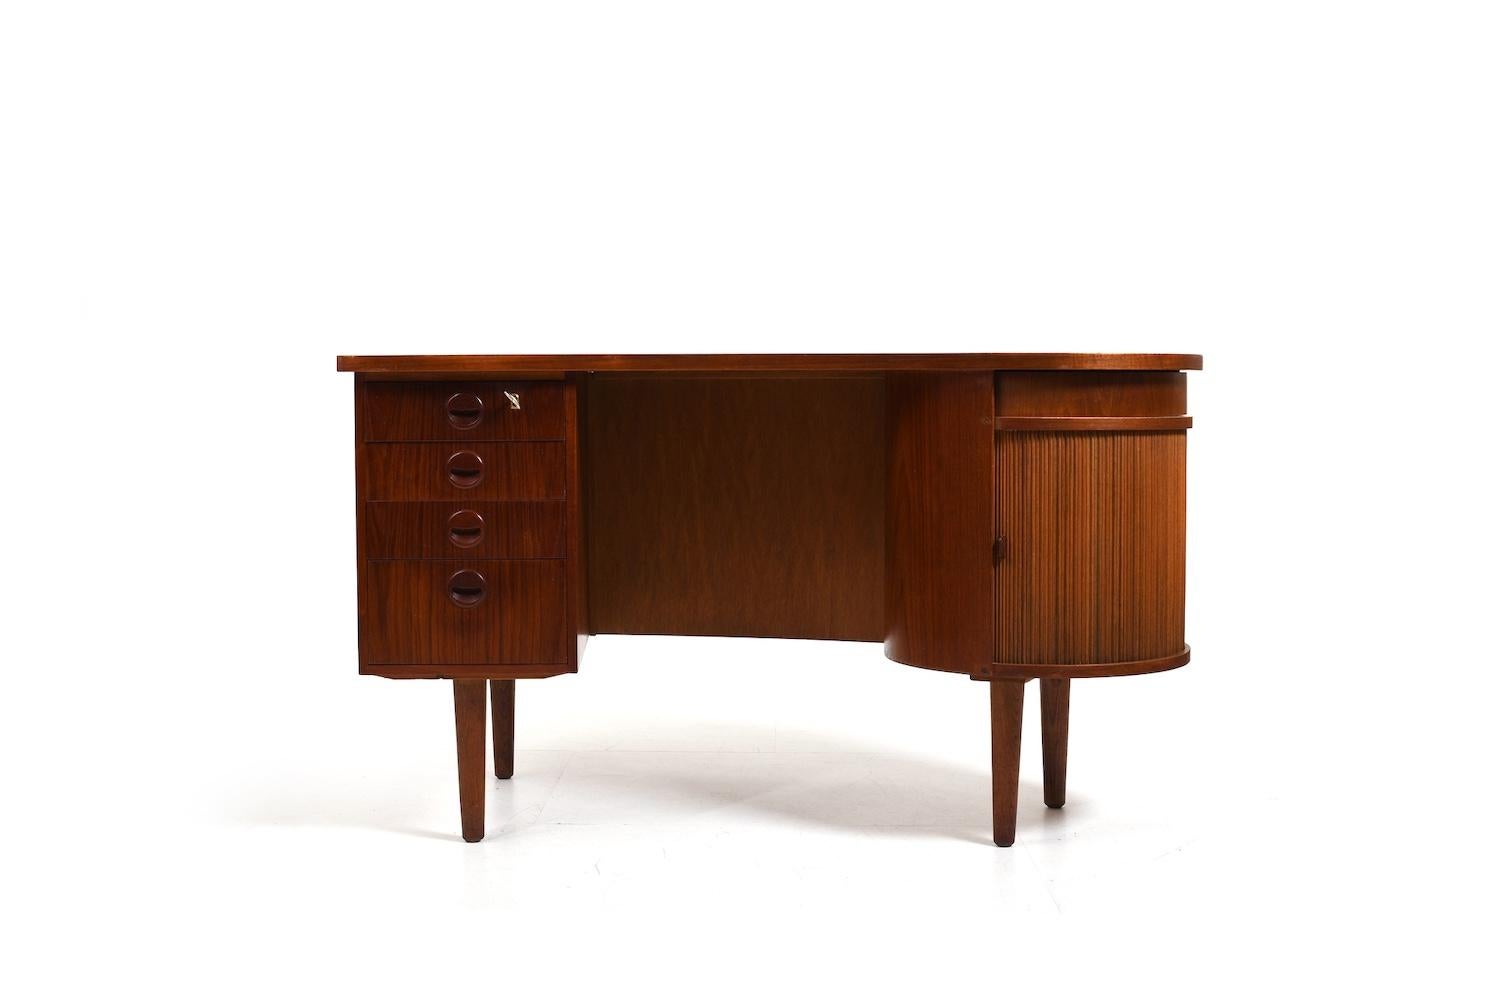 Freestanding teak kidney desk, model no.54 by Feldballes Møbelfabrik Denmark. Produced in 1950s  in teak. With 4 drawers, a tambour door on side and a rotating storage compartment with mirror. In front with bookshelves.